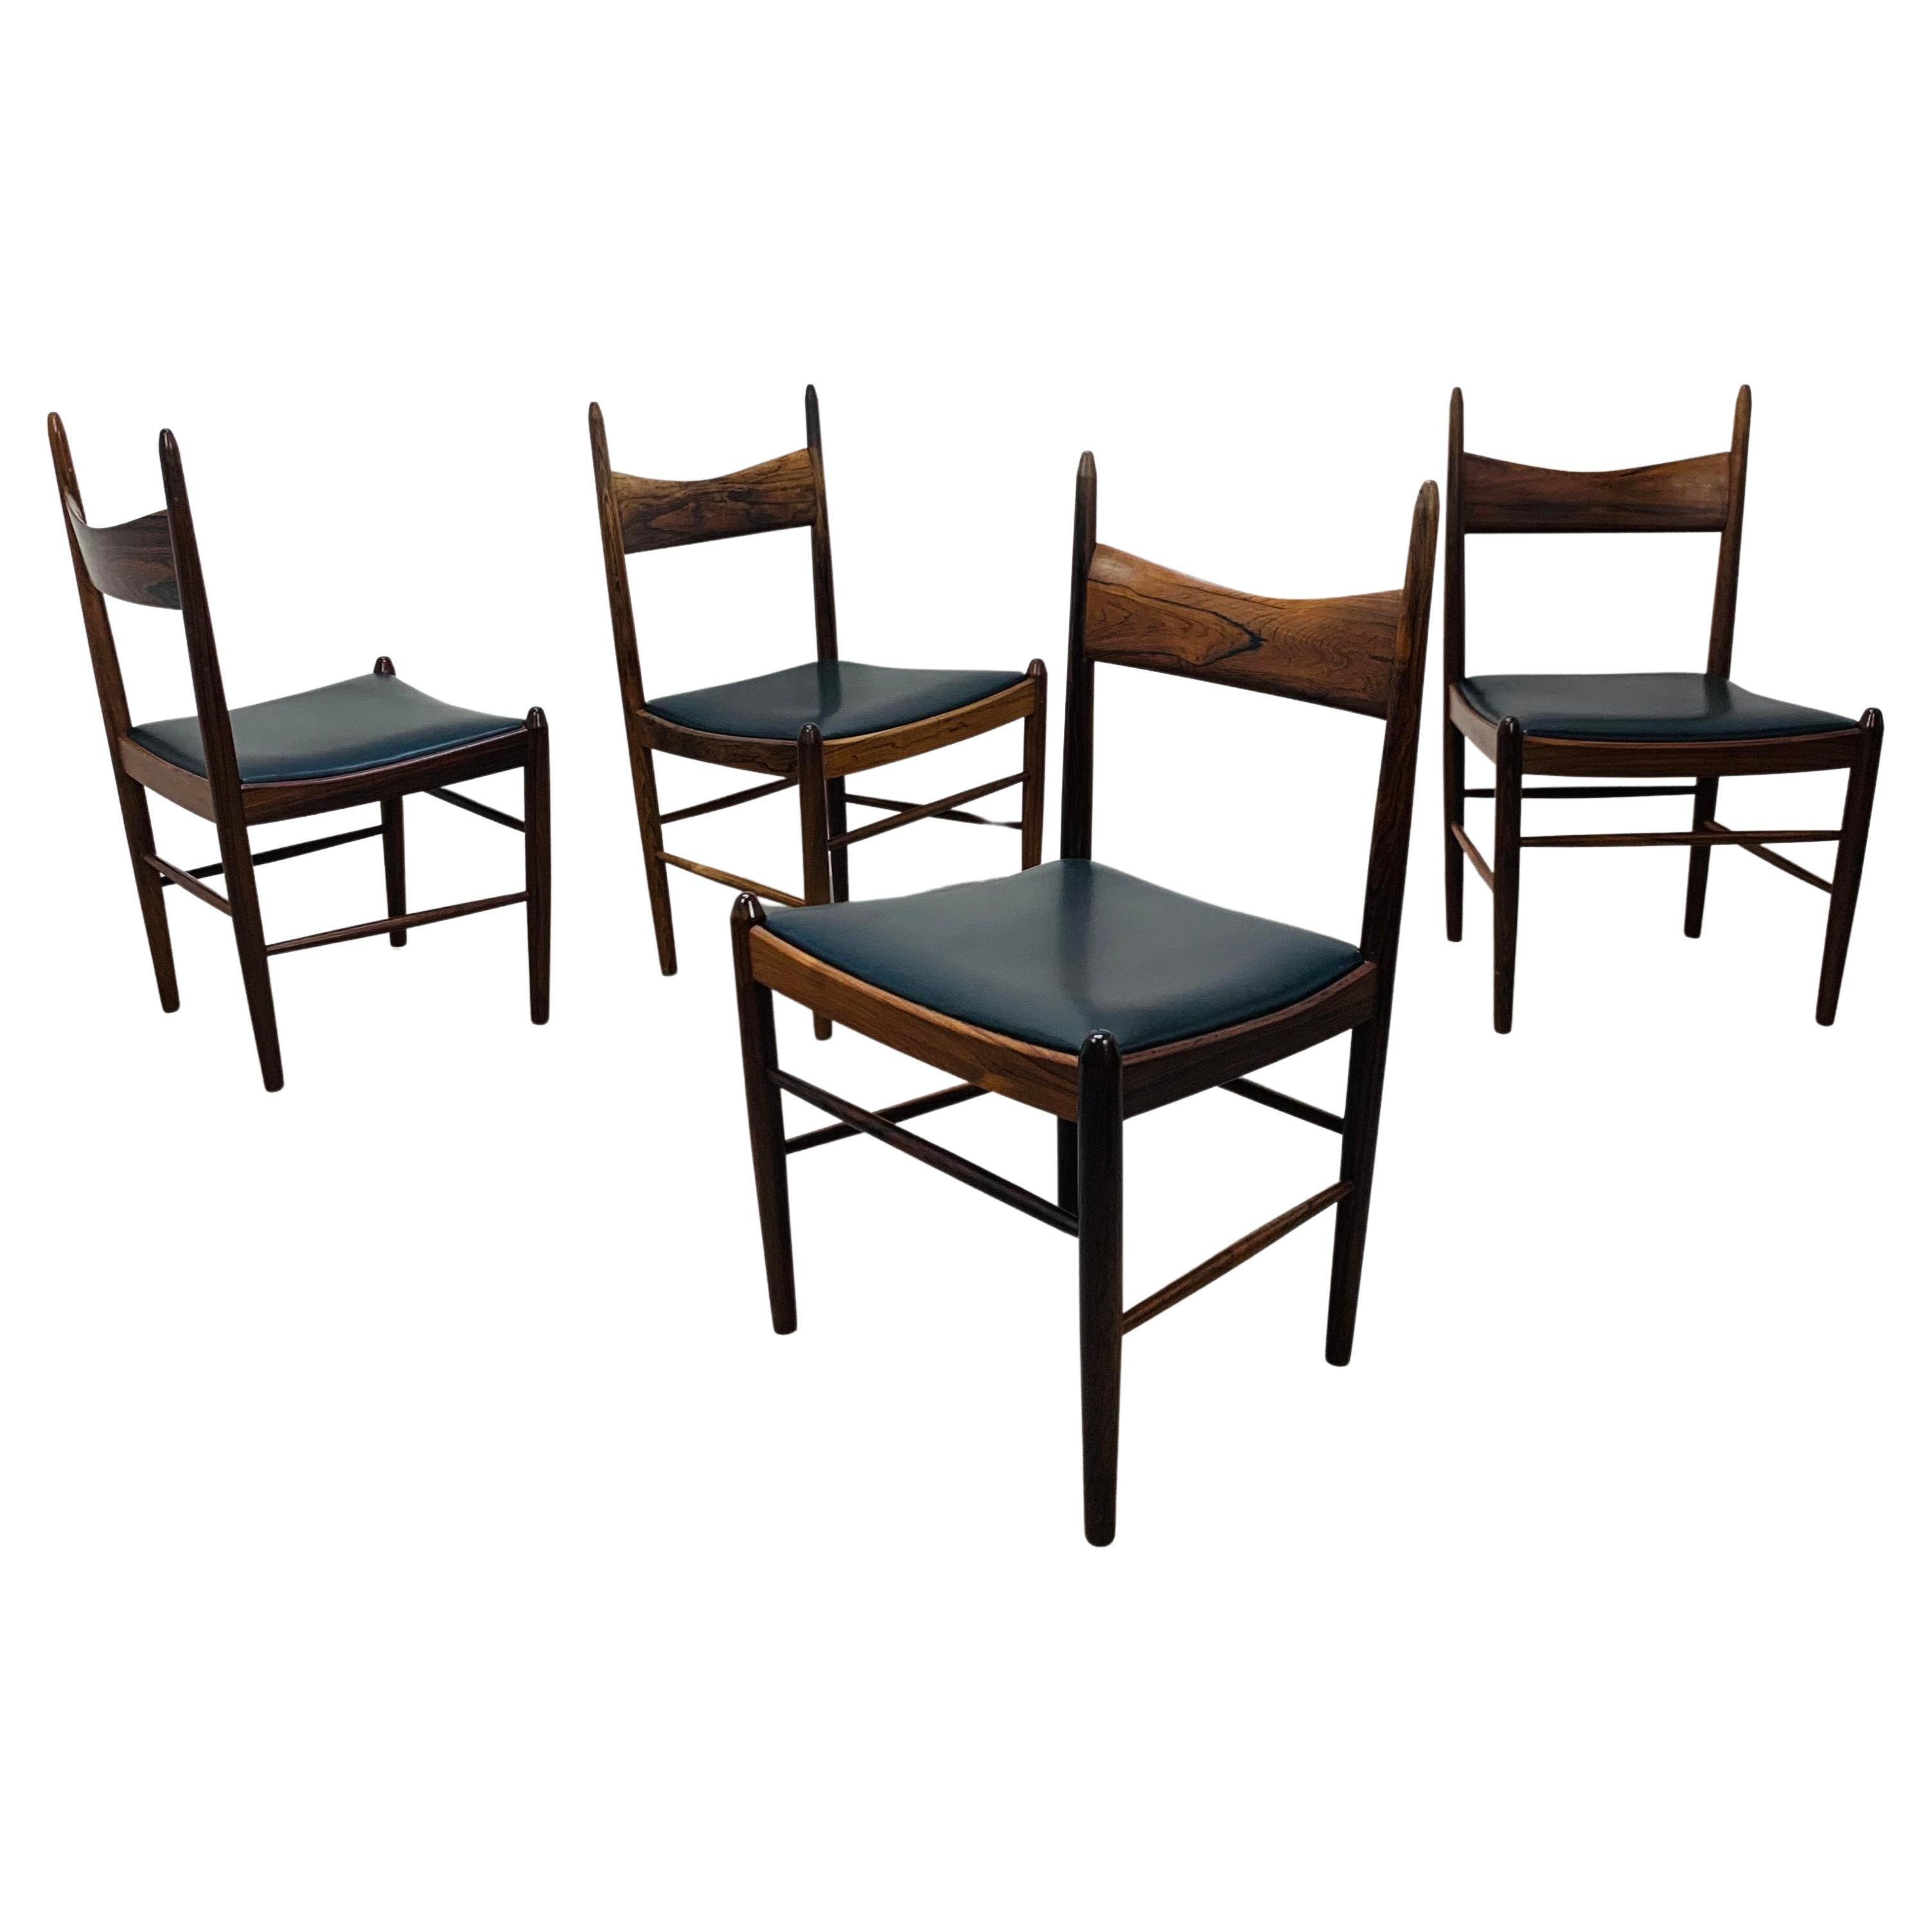 4 Scandinavian Rosewood Chairs by Vestervig Eriksen for Tomborg, 1960 For Sale